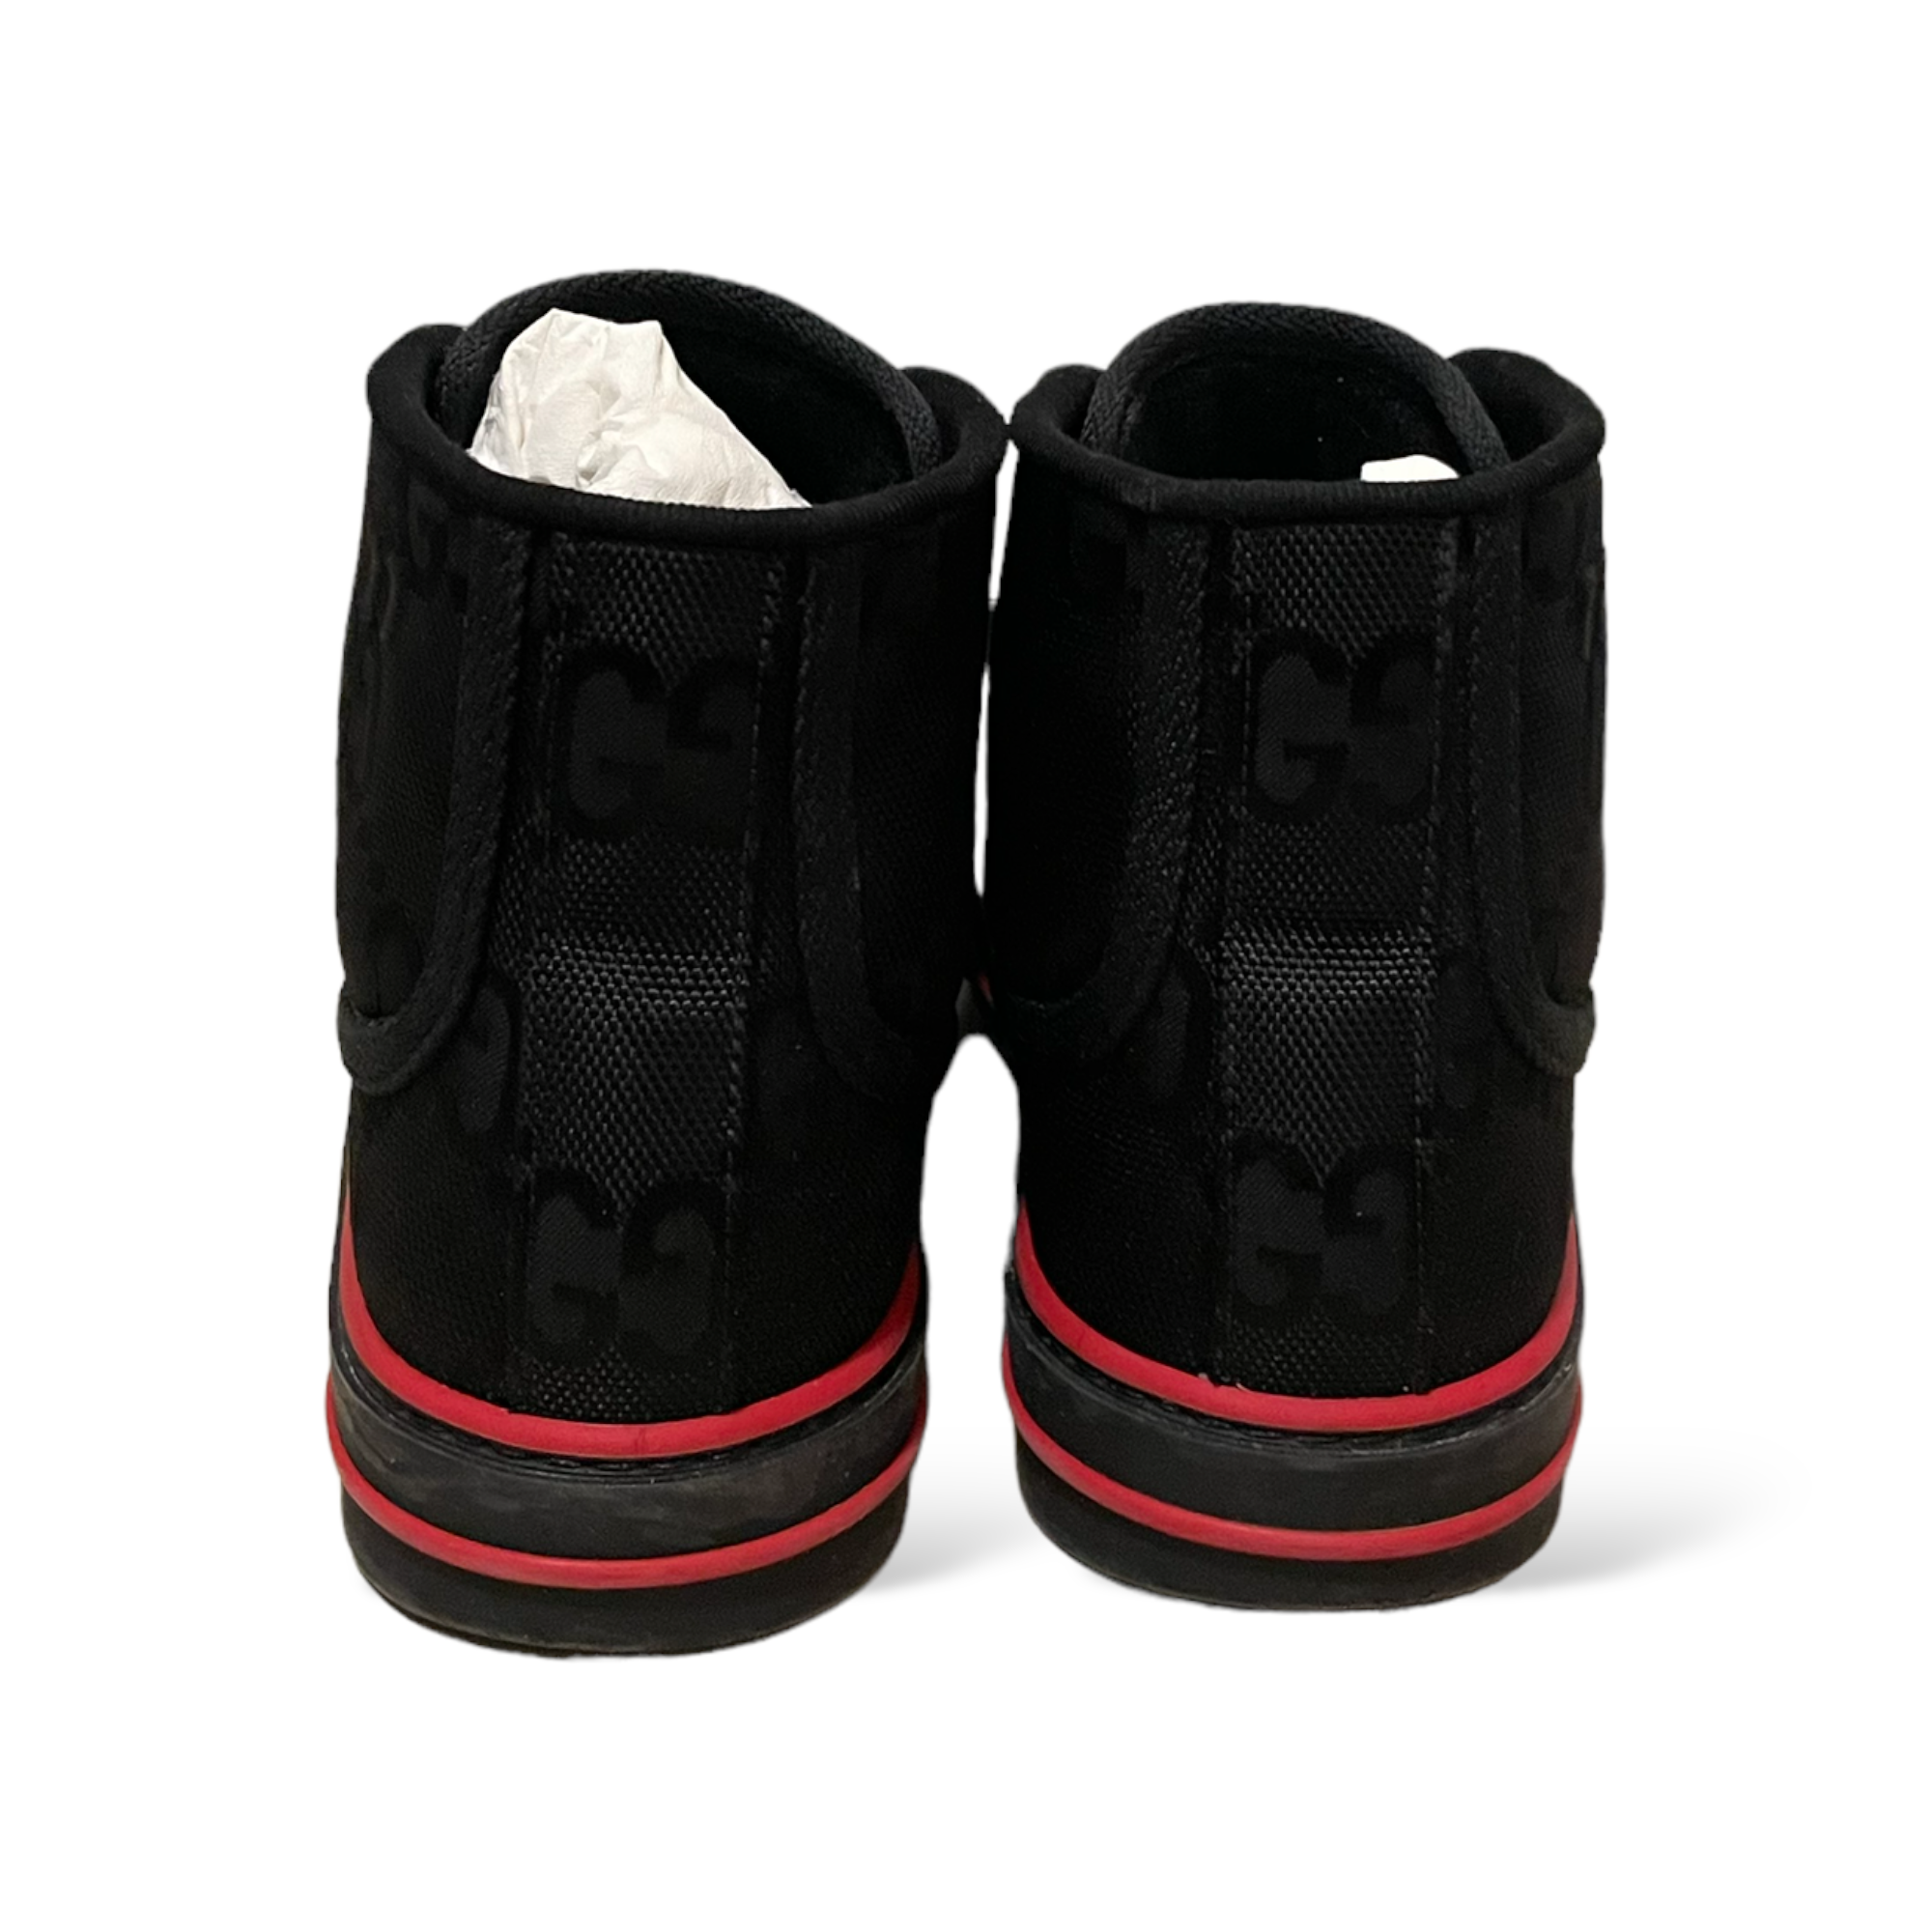 GUCCI Off The Grid high top sneaker |Size: 37.5|